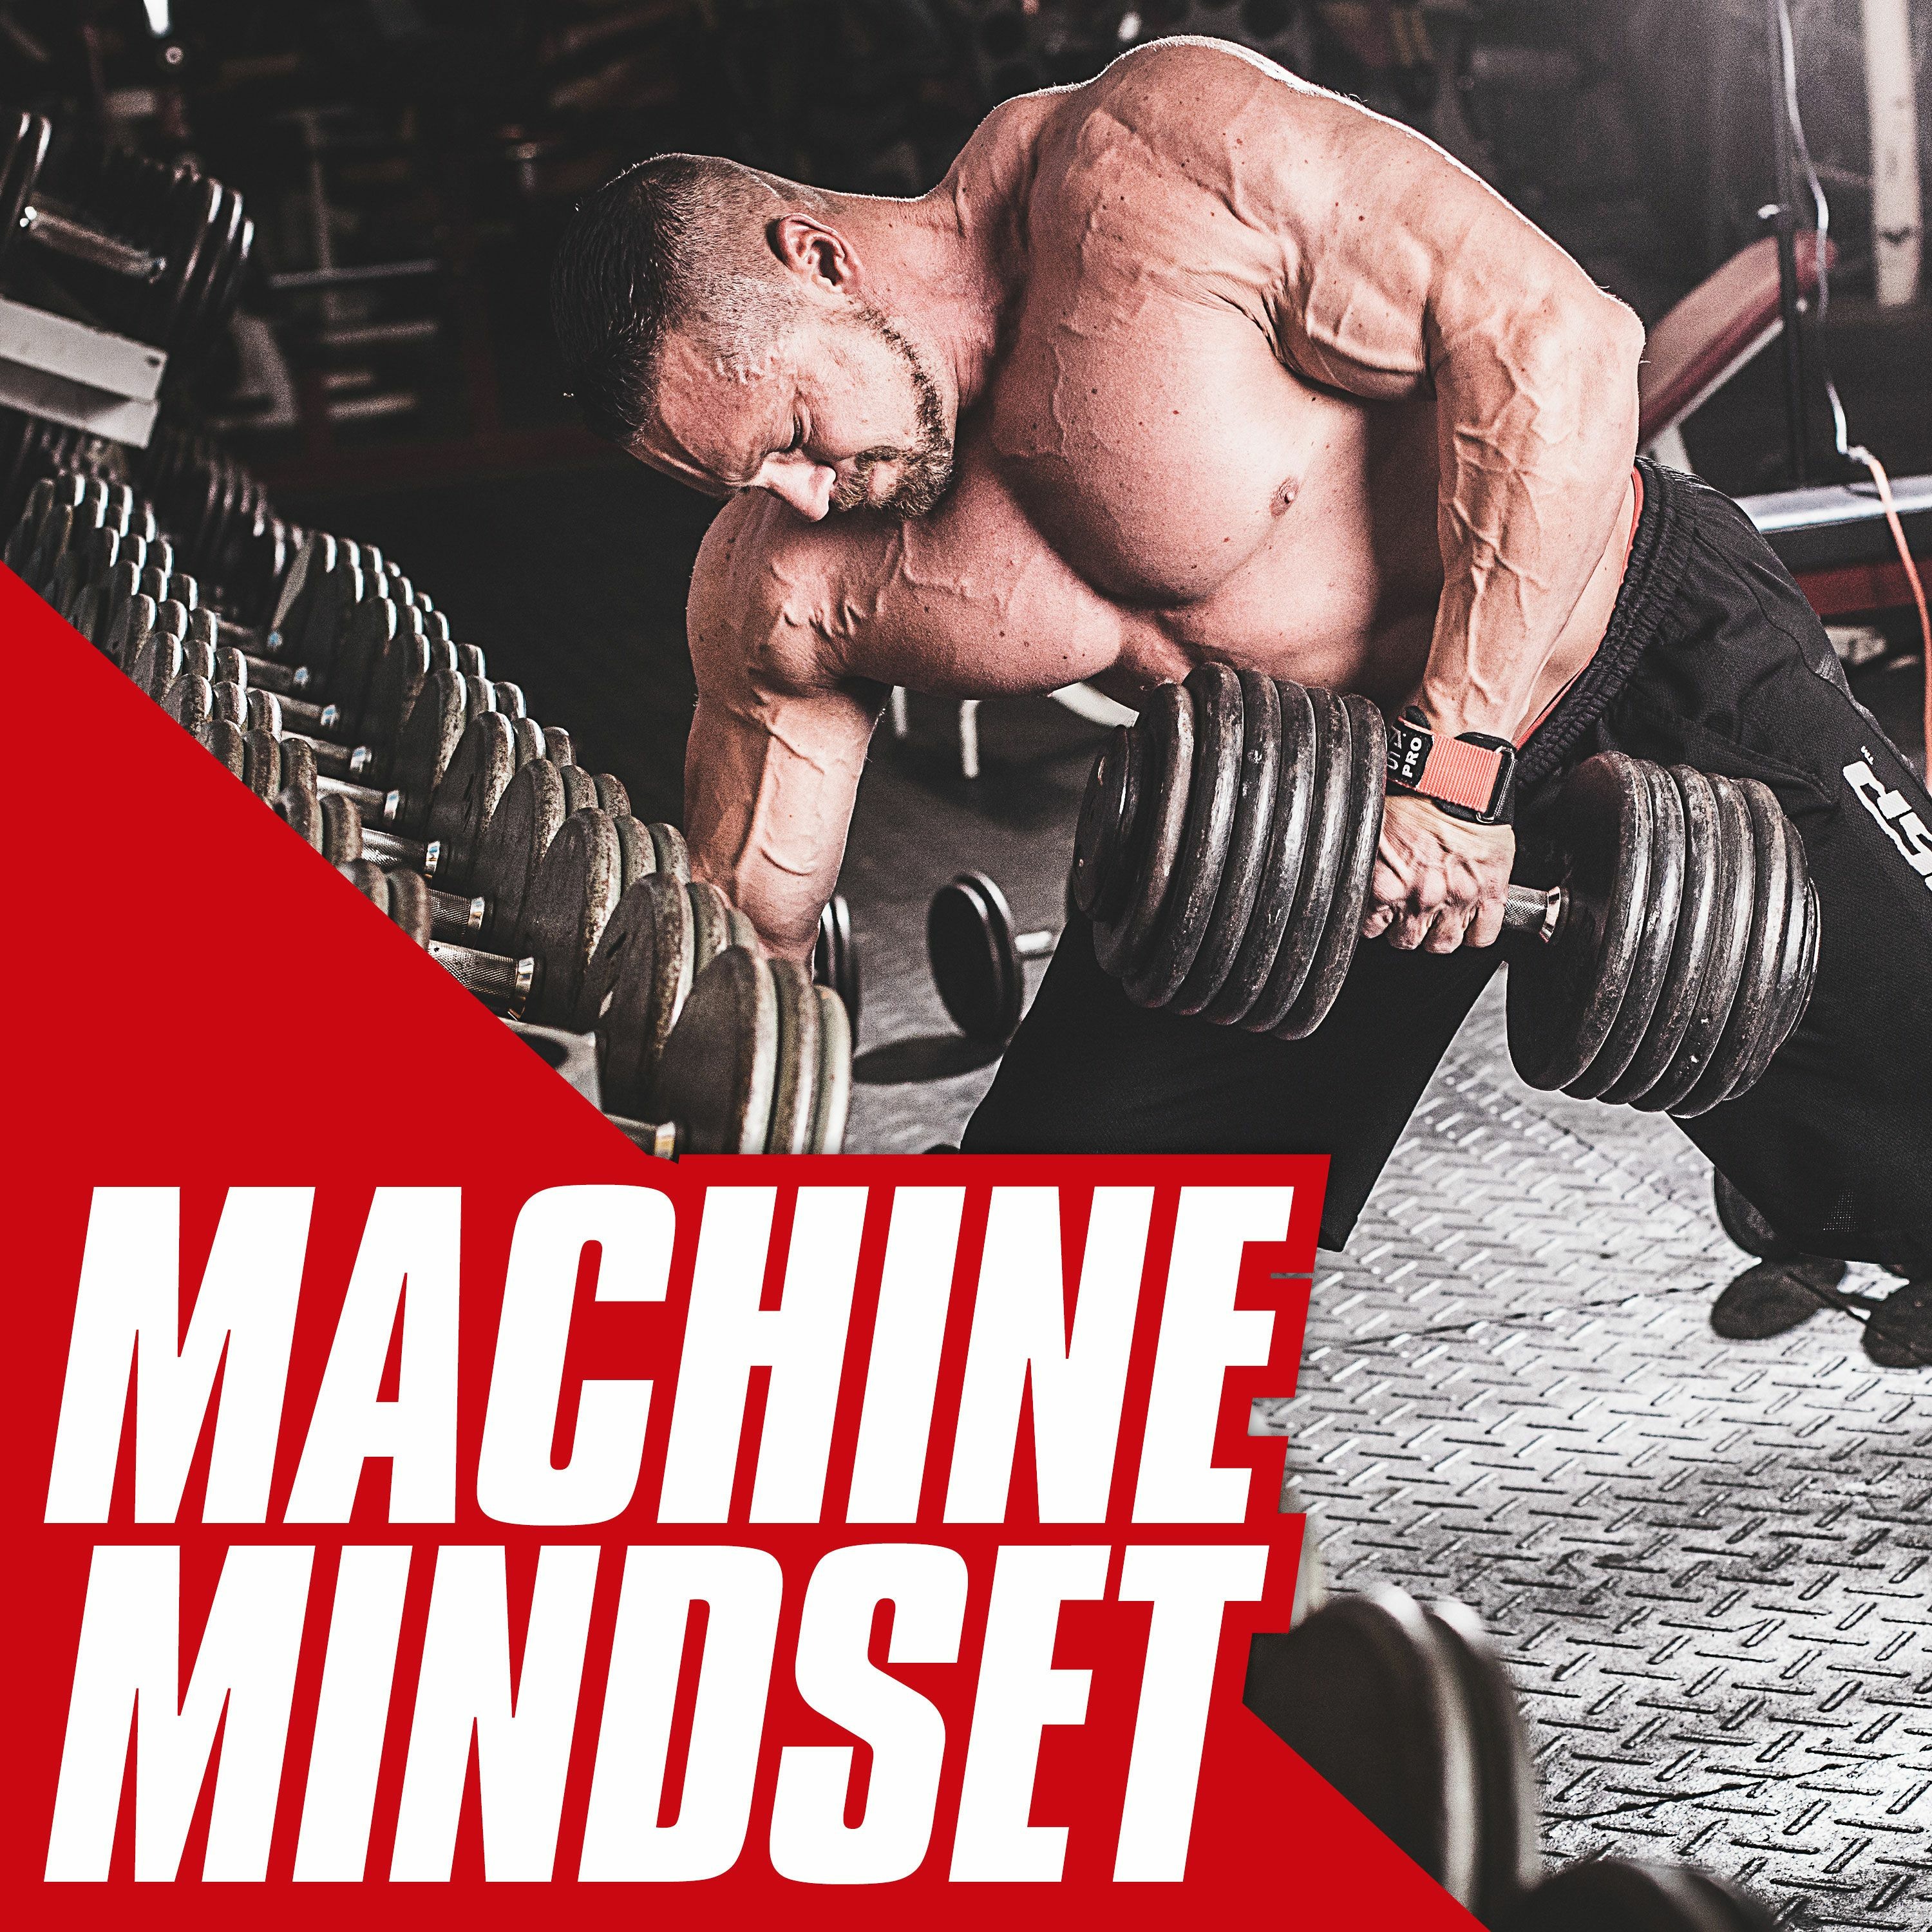 Machine Mindset Podcast 5 | Social Media Bullying, Corporate Tax Rate, Health Care, Al Gore